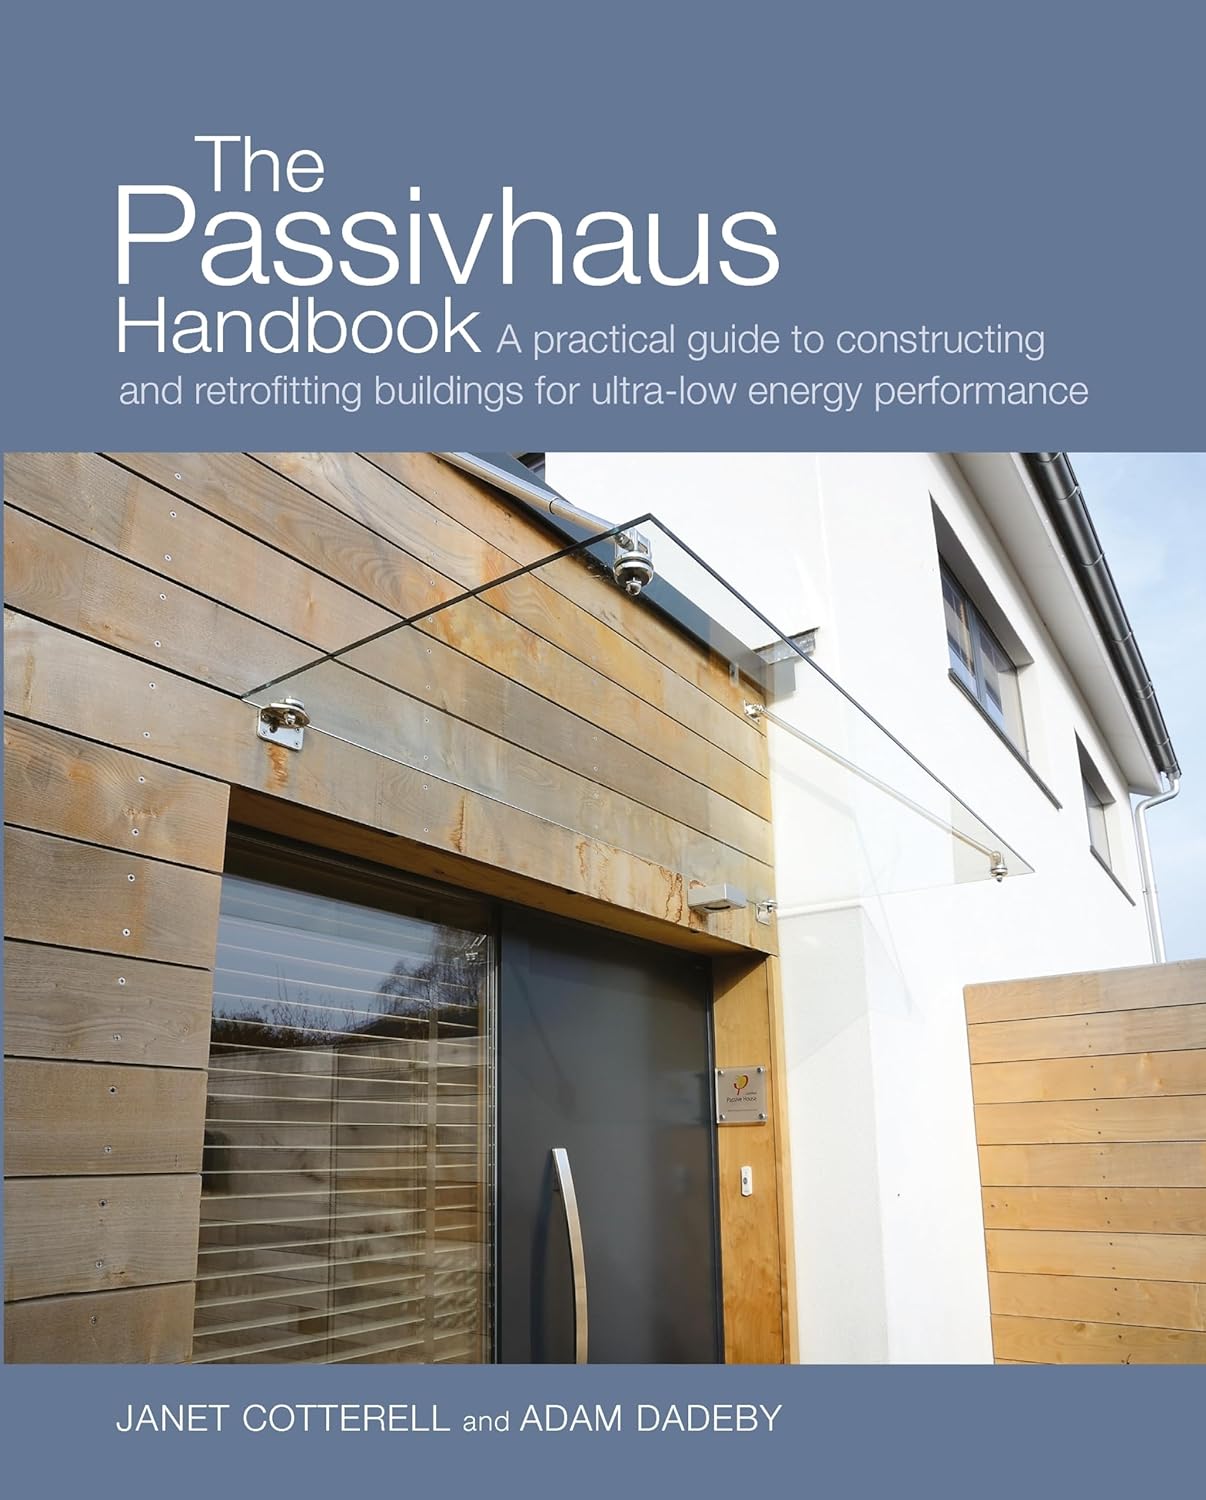 the passivhaus handbook a practical guide to constructing and retrofitting buildings for ultra low energy performance su